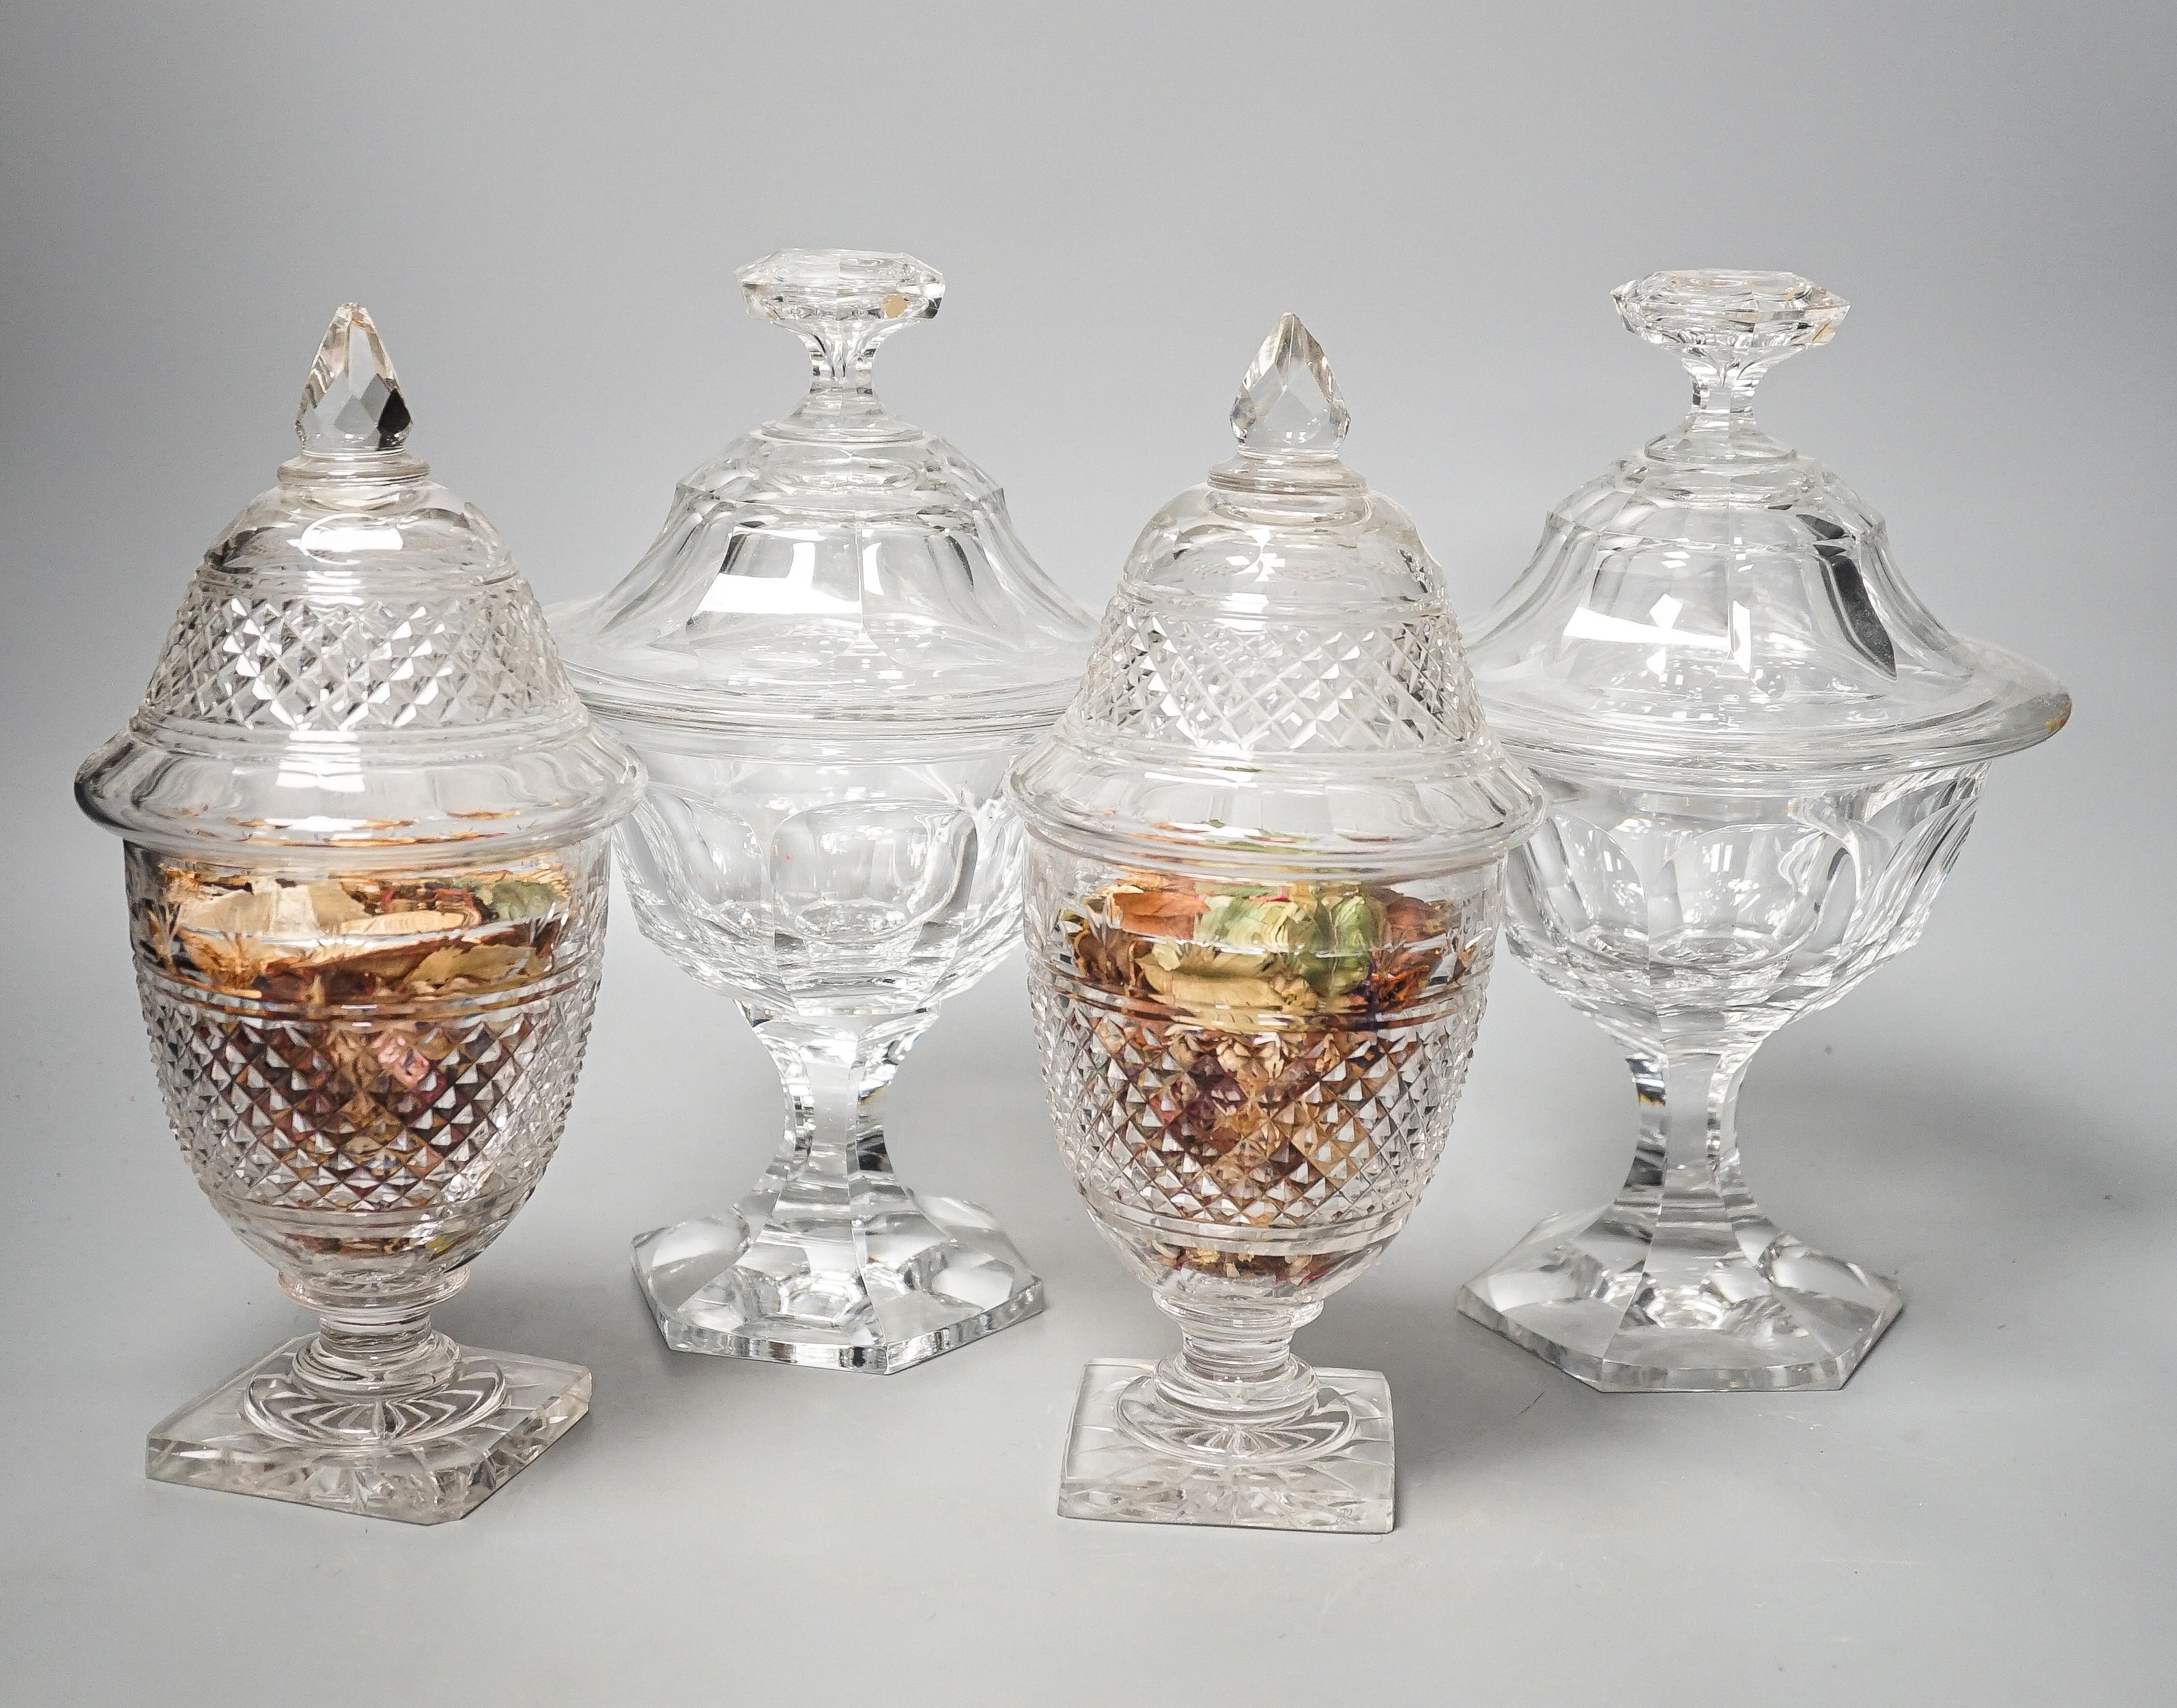 Two pairs of 19th century cut glass glass sweetmeat jars and covers (one a.f.), tallest 25 cms high.